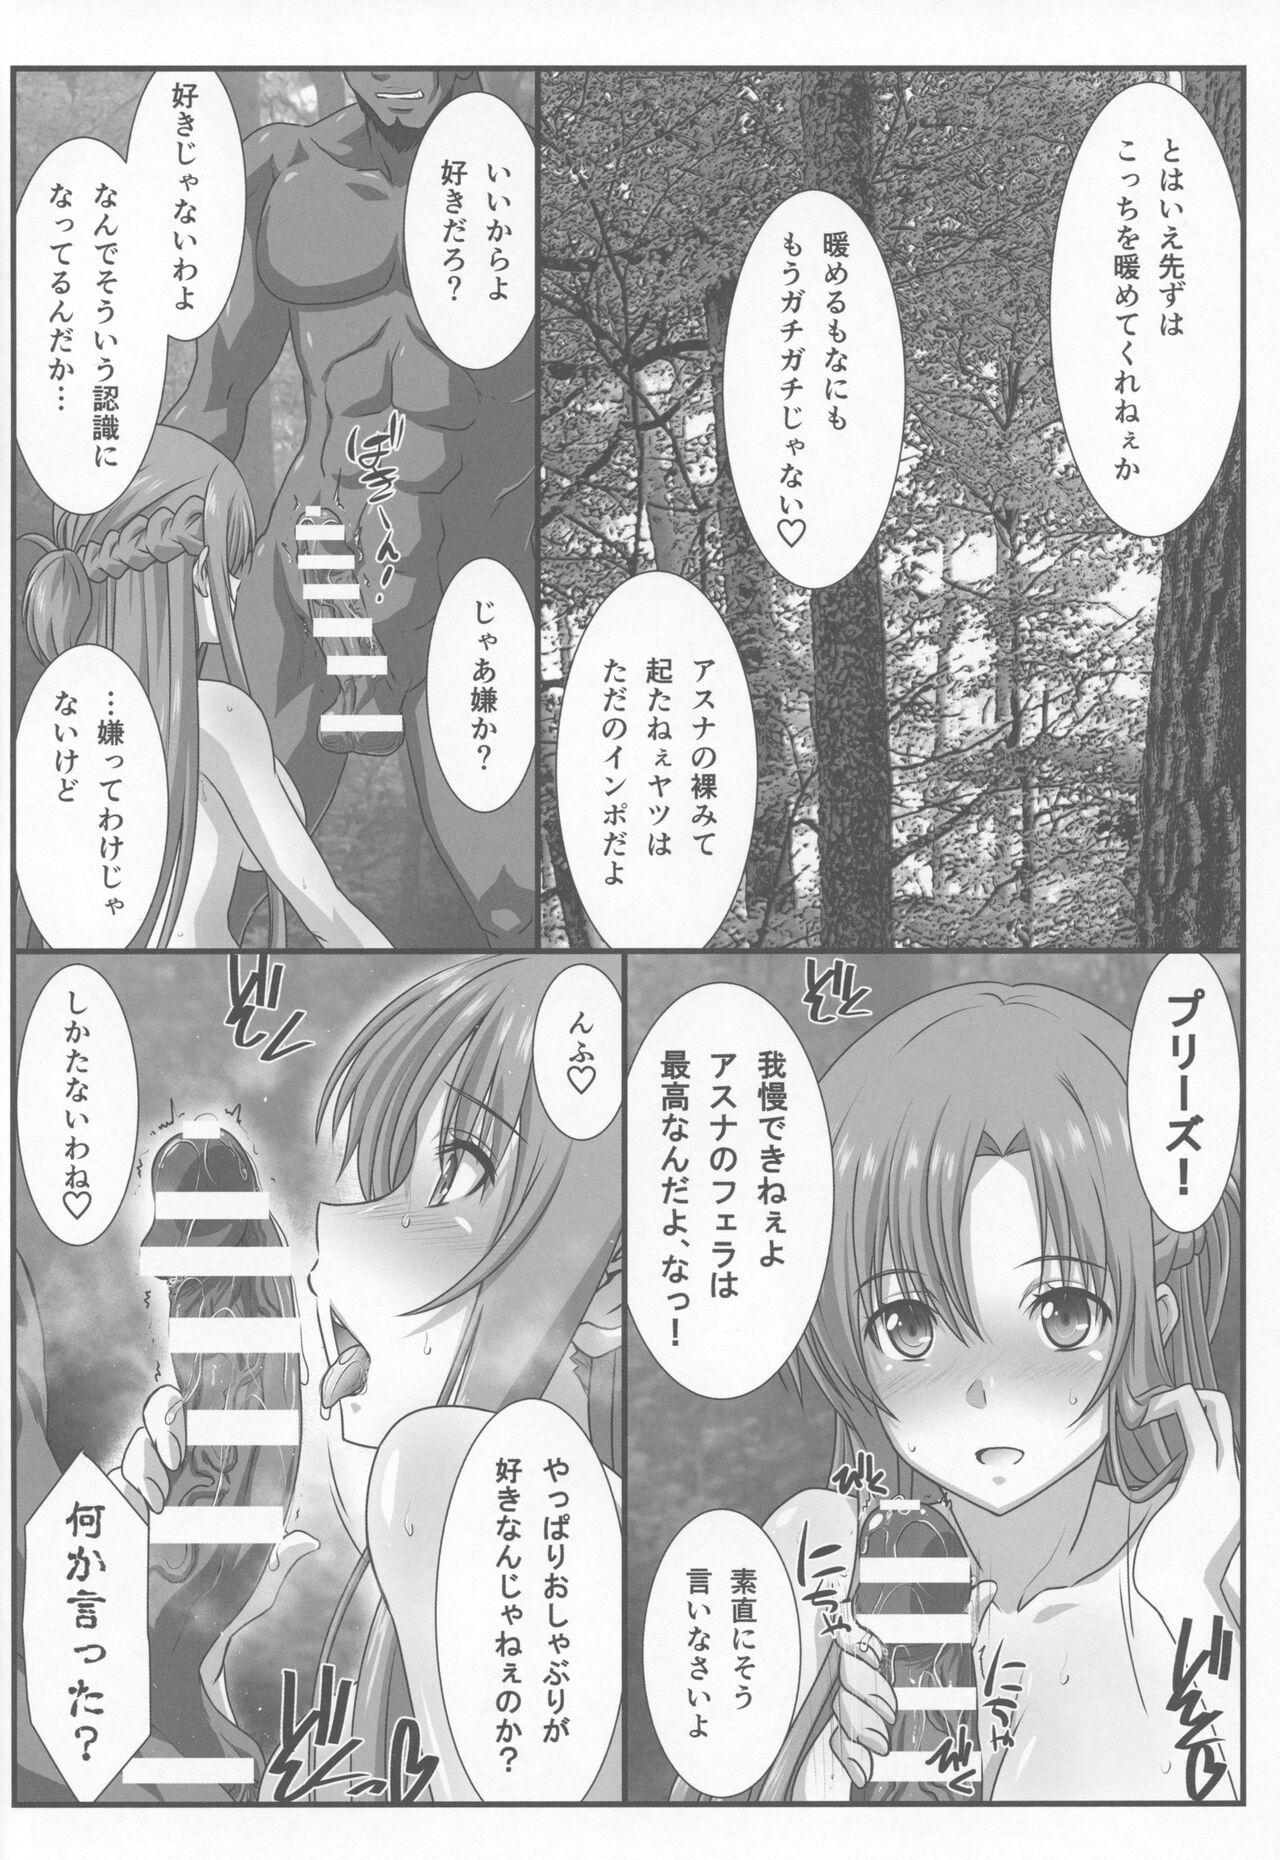 Gayporn Astral Bout Ver. 45 - Sword art online Class - Page 5